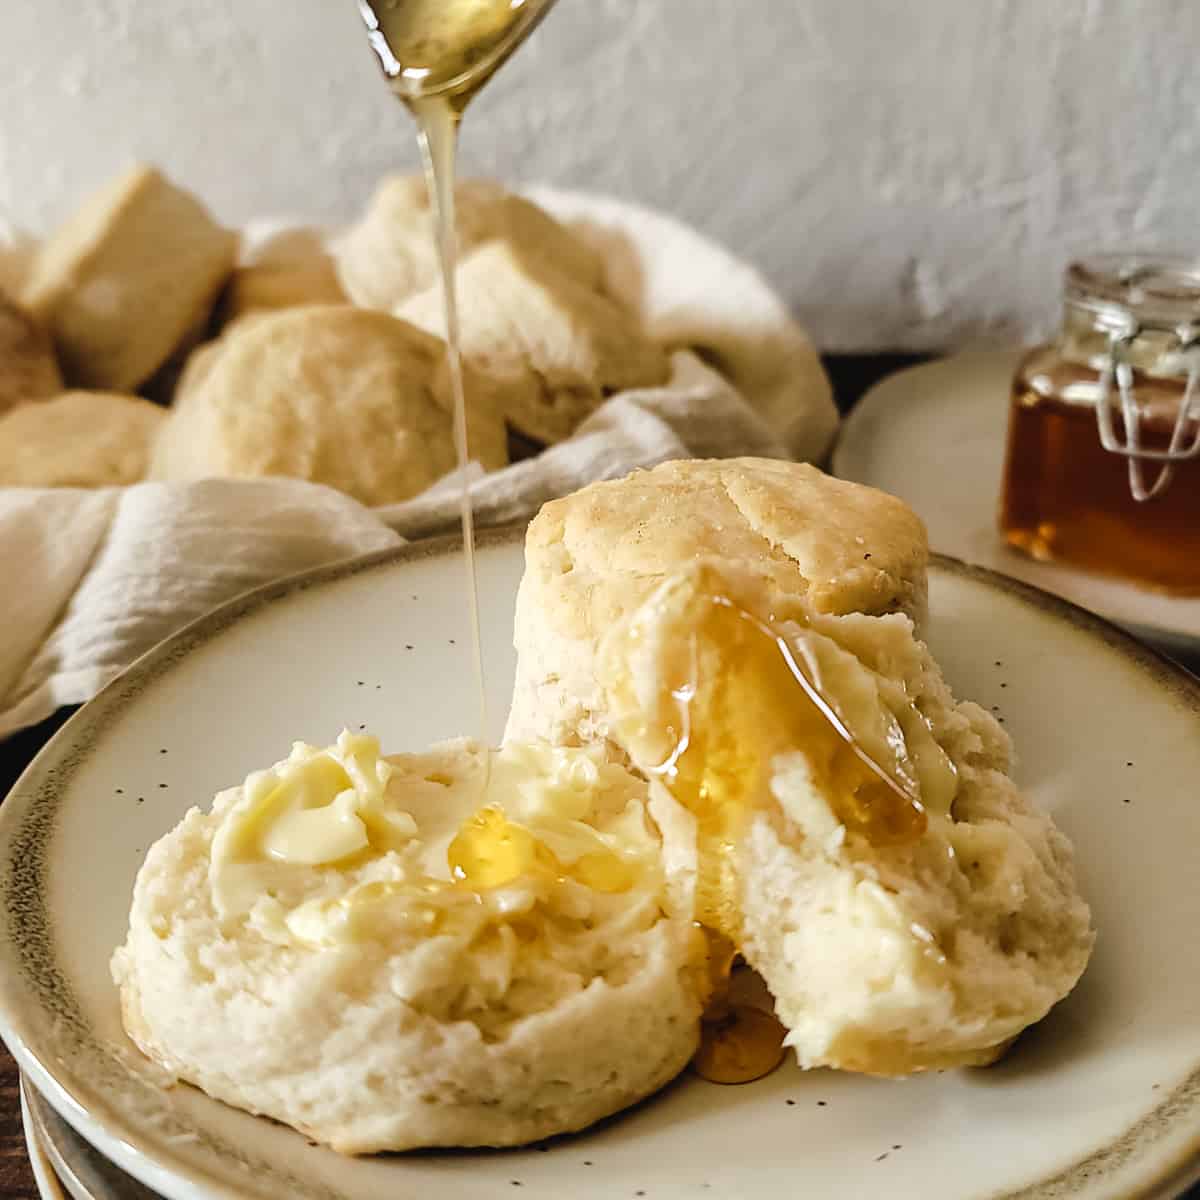 Honey drizzled over a biscuit half on a plate with butter.